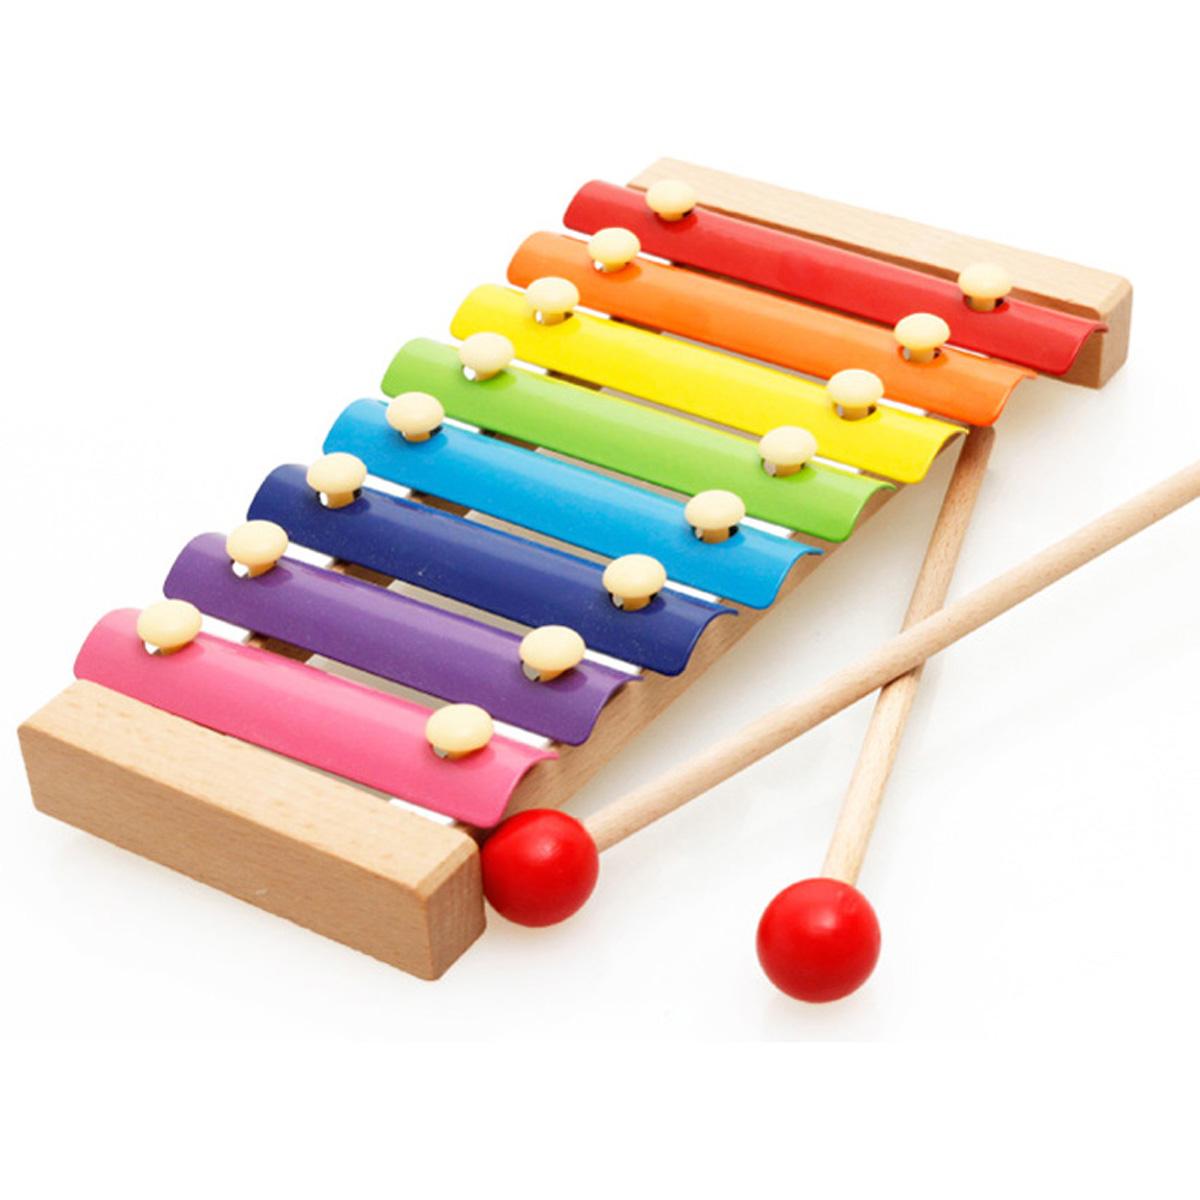 Top Bright Wooden Xylophone Baby Toy and 2 Child-Safe Mallets Eight Tones Tuned Glockenspiel Musical Instruments for Kids with 3 Educational Music Scores 